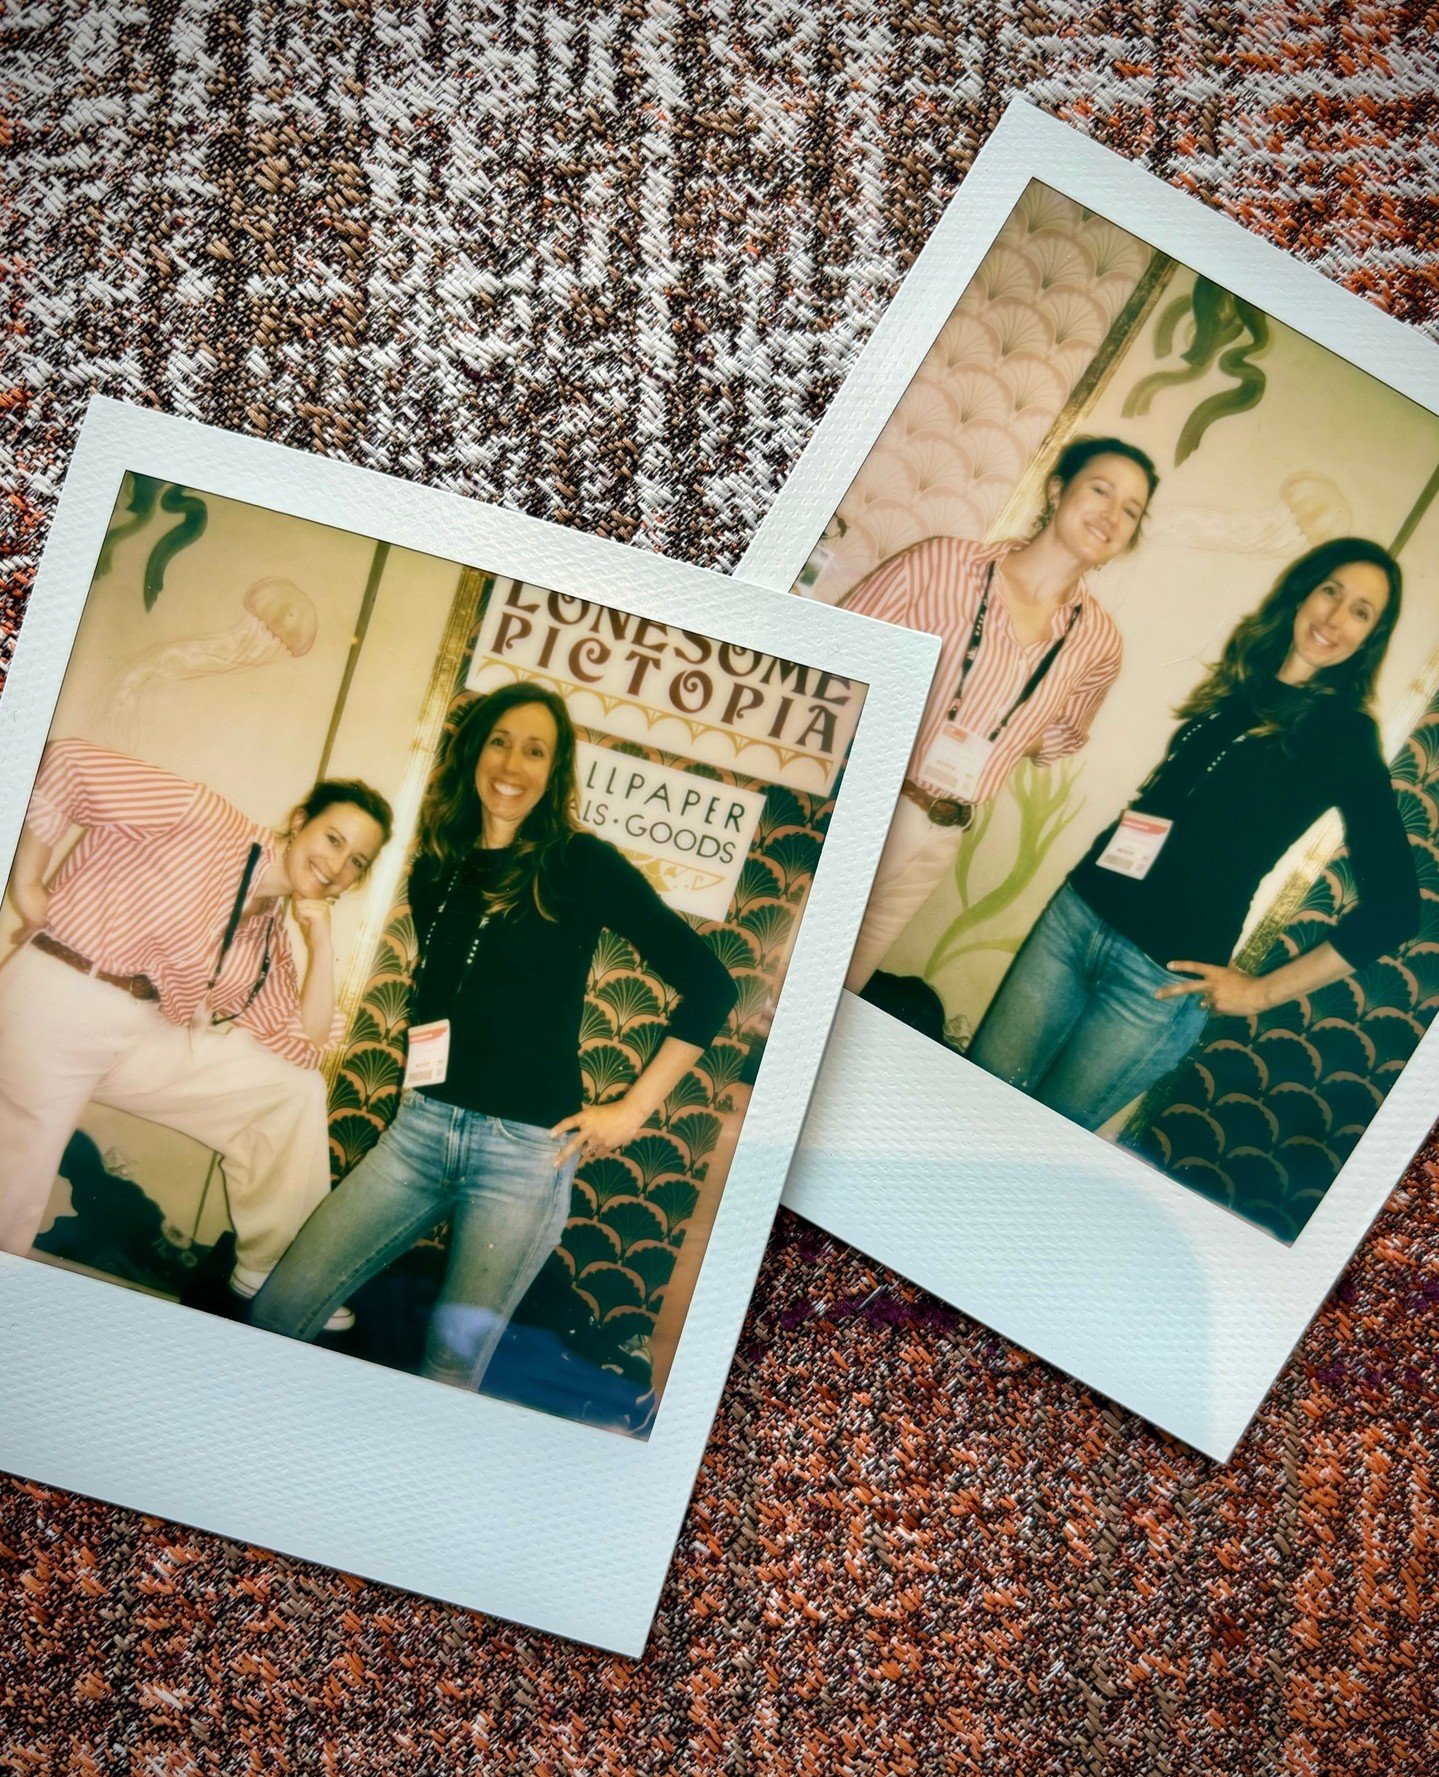 When geeking out about purposeful, experiential hospitality design that maximizes ADR and ROI, polaroids are in order. #vrdsummit